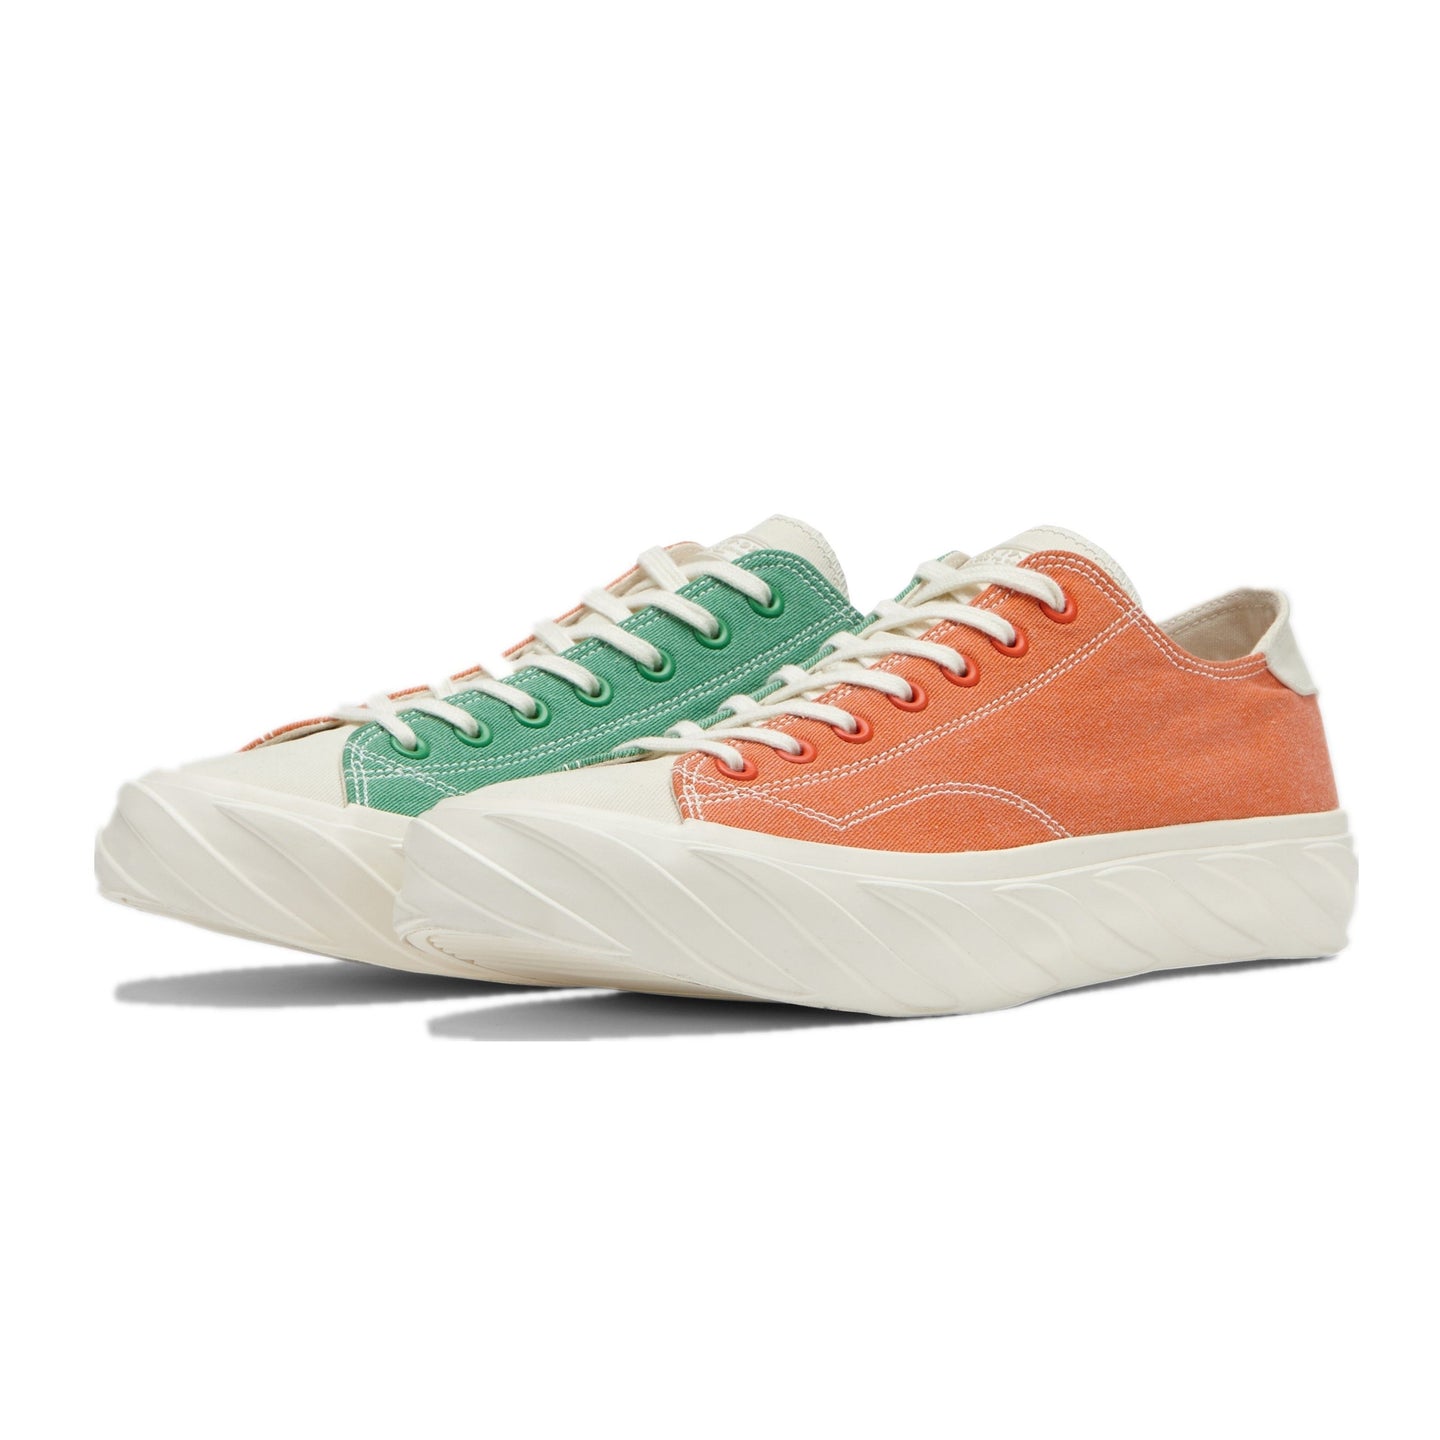 AGE SNEAKERS Low Cut Canvas Carrot